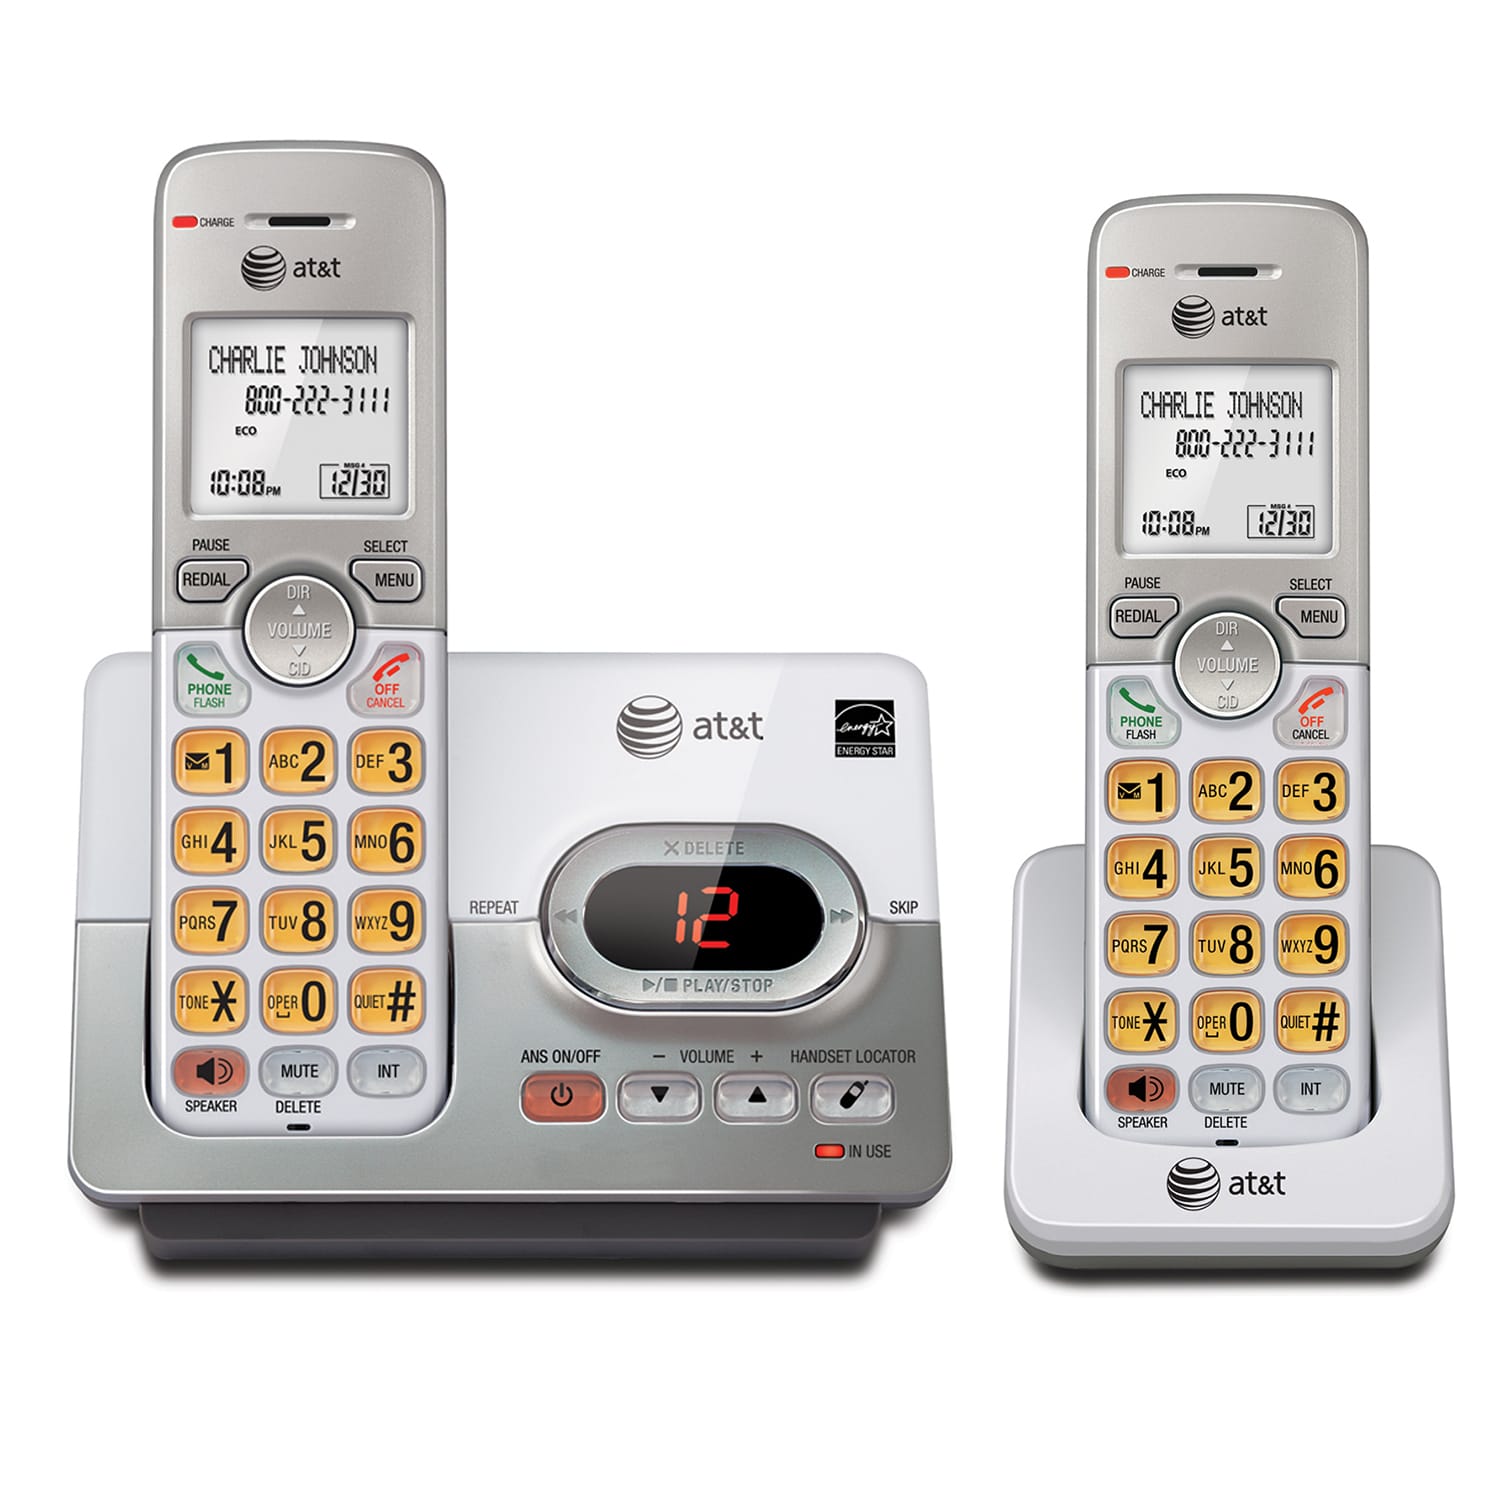 2 handset cordless answering system with caller ID/call waiting - view 1